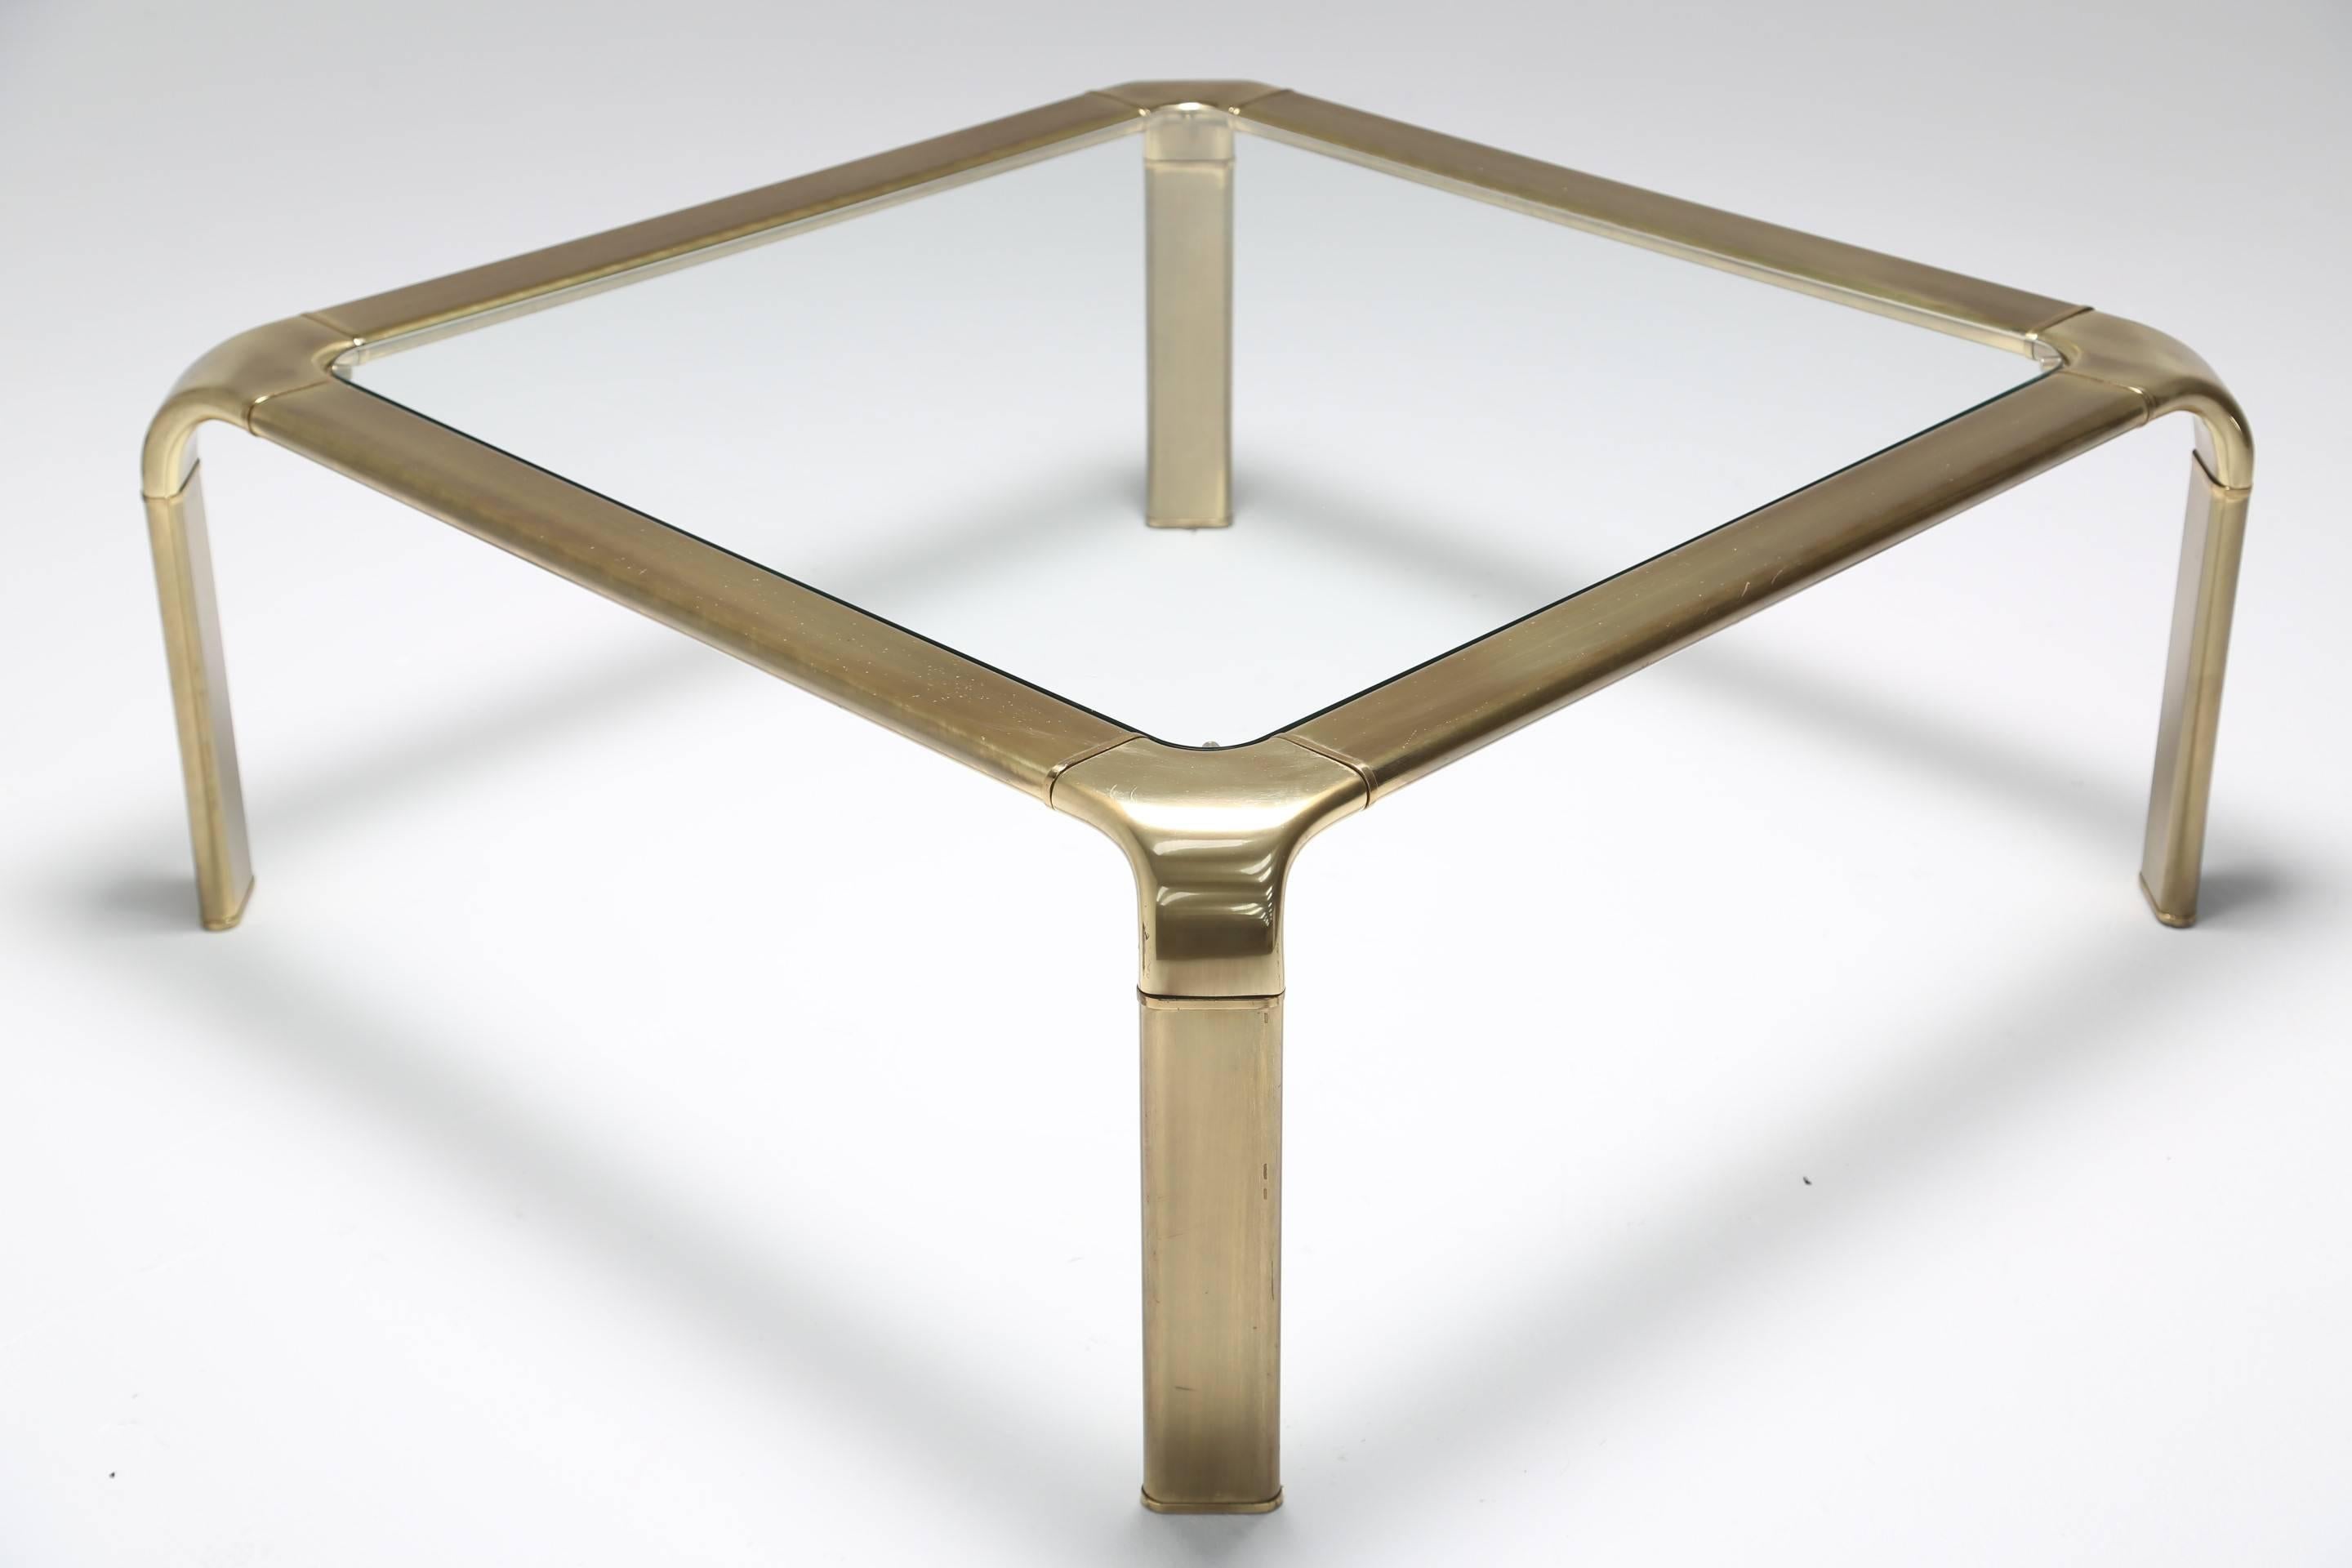 A beautiful 1970s waterfall coffee or cocktail table in patinated brass with fitted glass top. A very generous sized and solid coffee table, made in the USA by American furniture company Widdicomb. Very easily shipped worldwide.